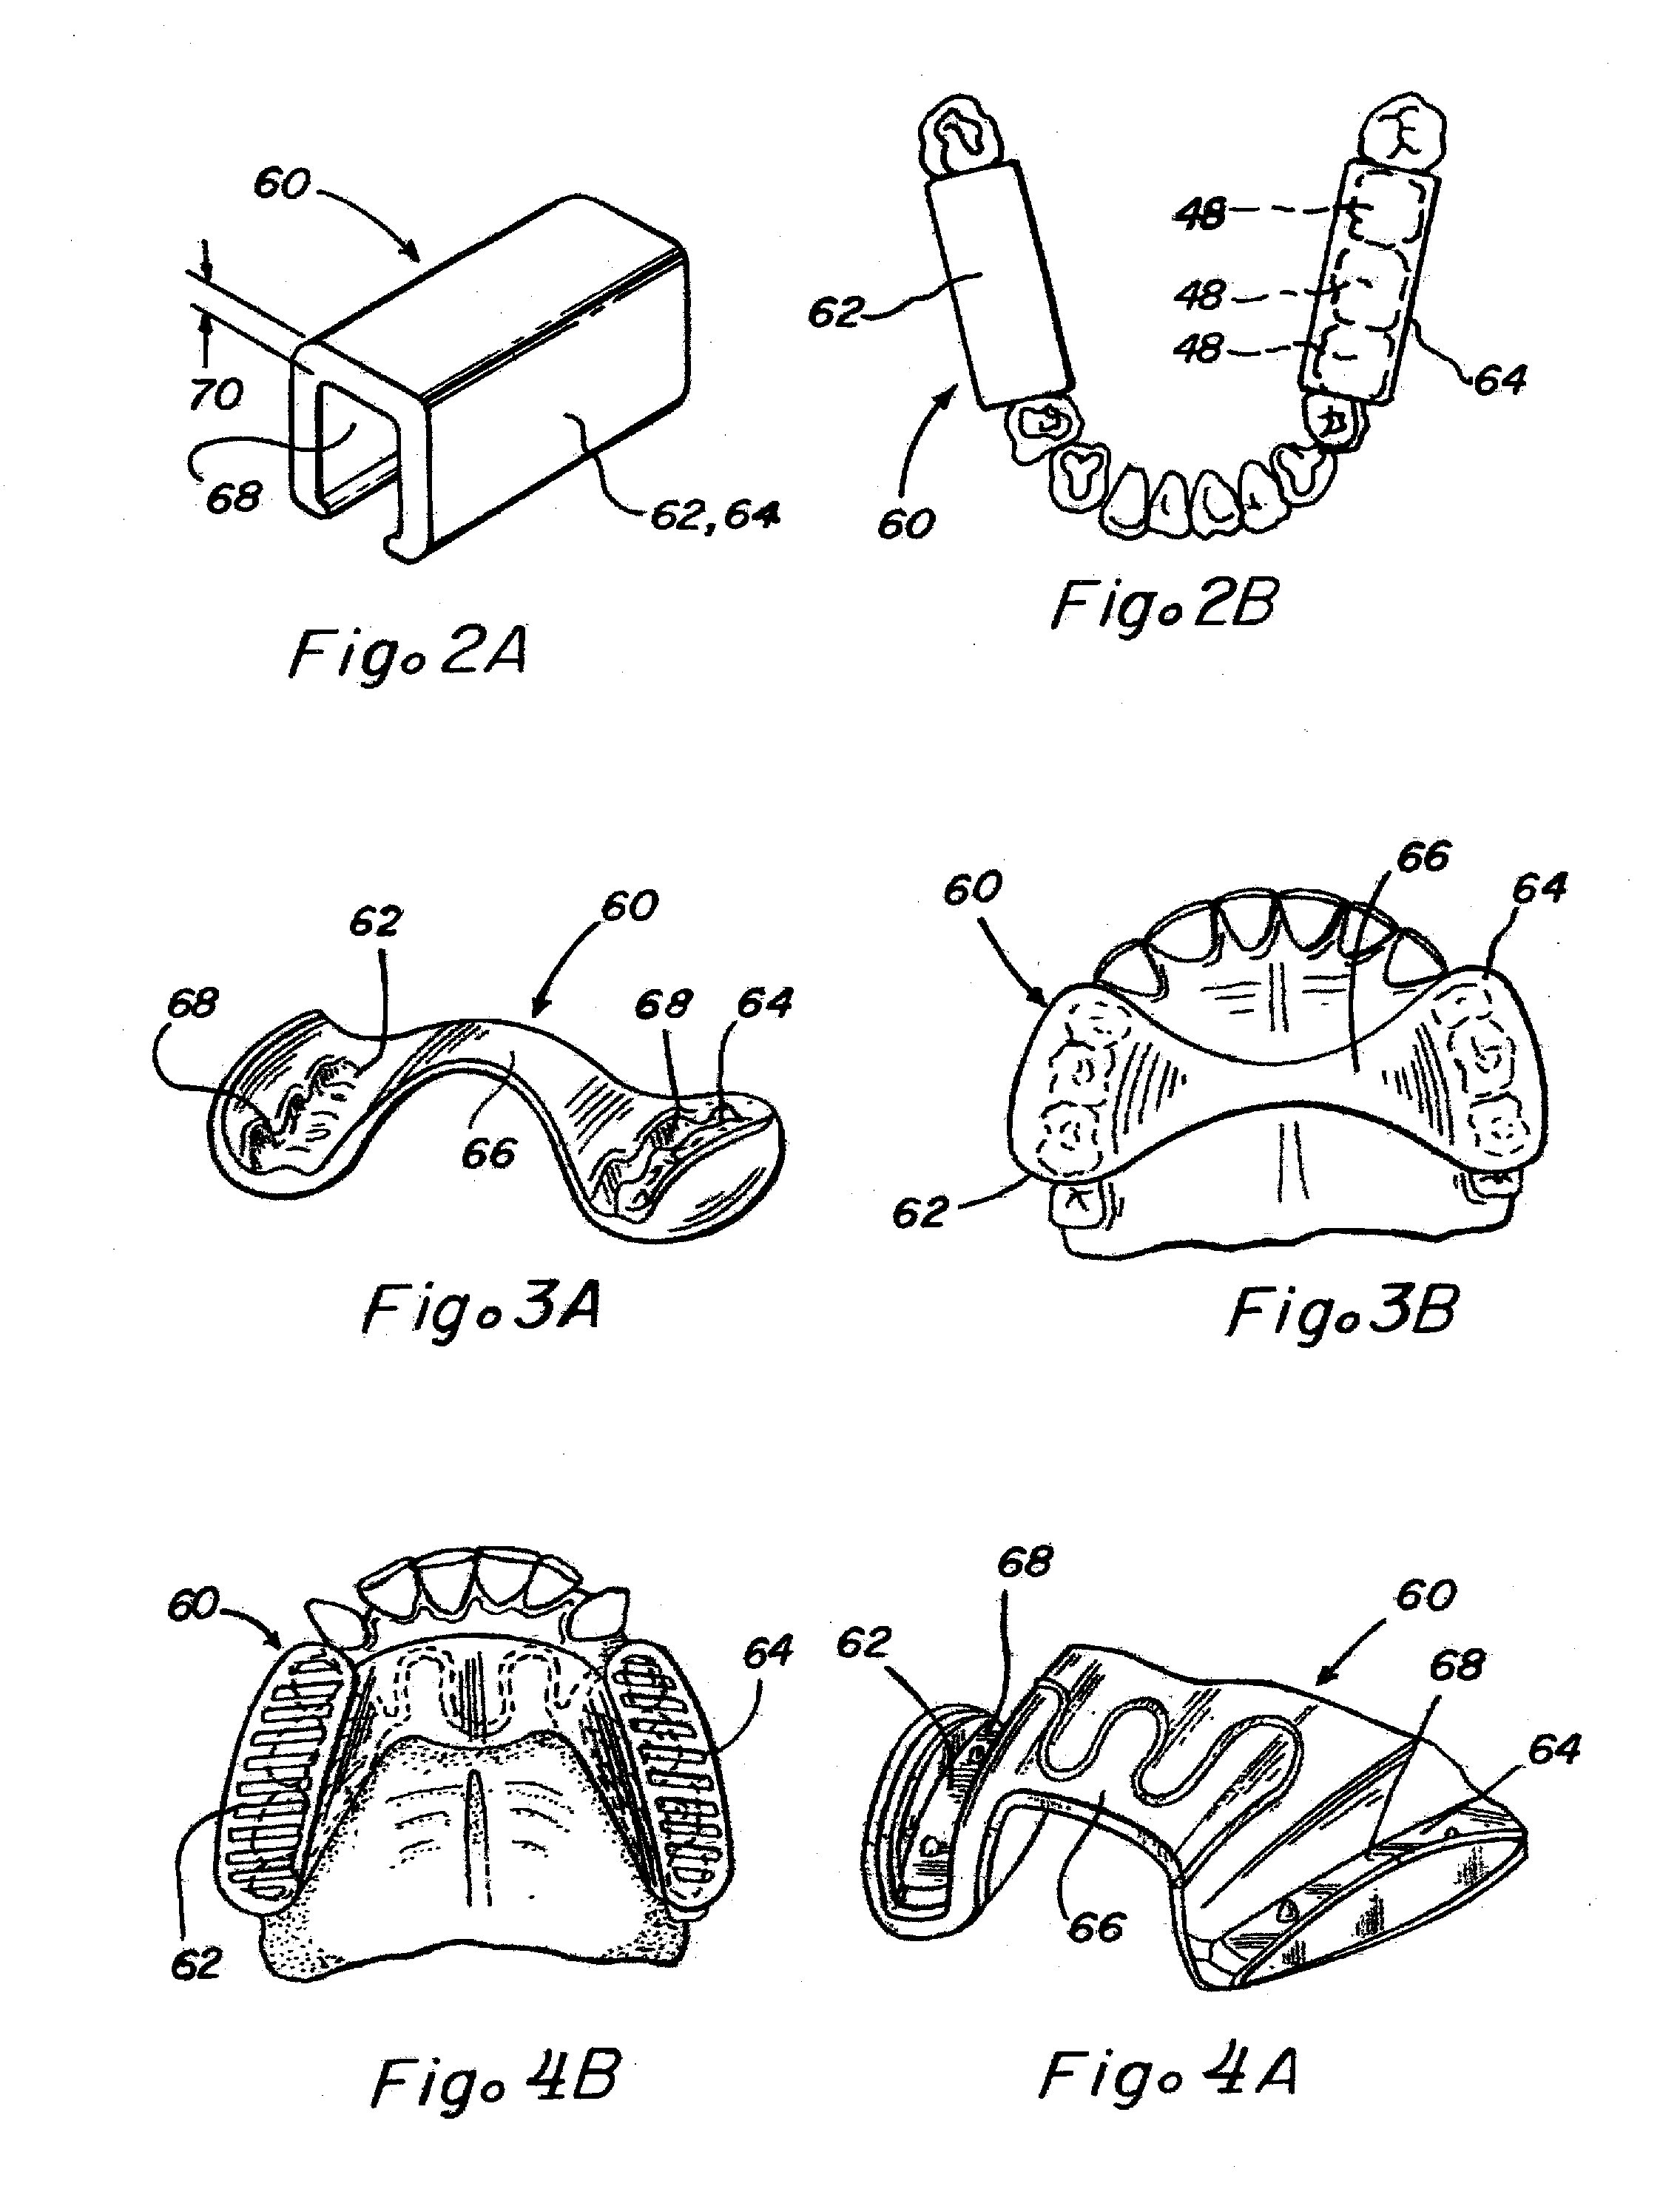 Methods and Apparatus for Reduction of Cortisol